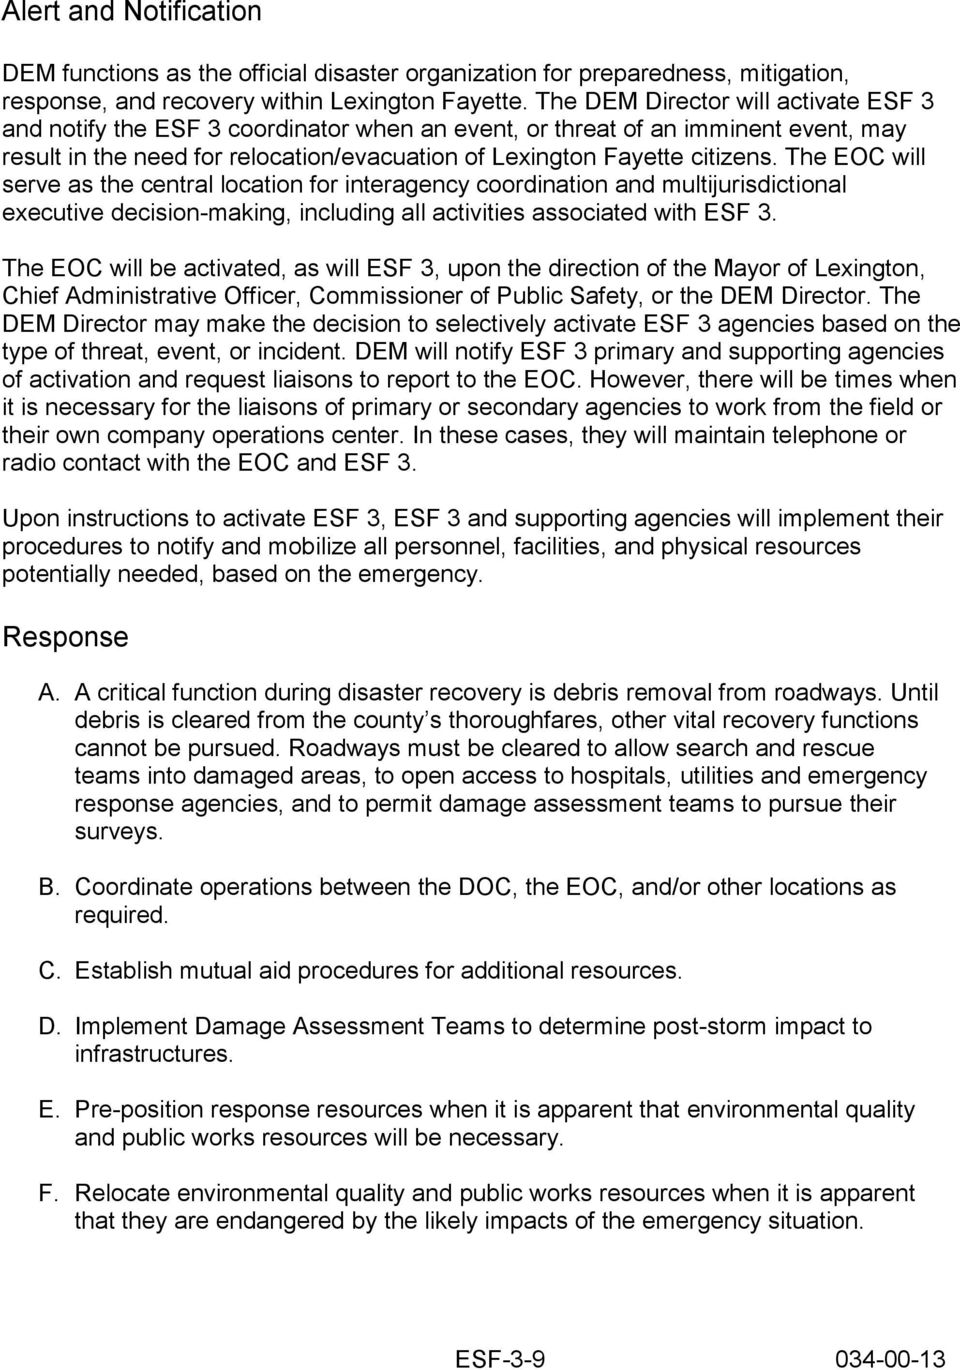 The EOC will serve as the central location for interagency coordination and multijurisdictional executive decision-making, including all activities associated with ESF 3.